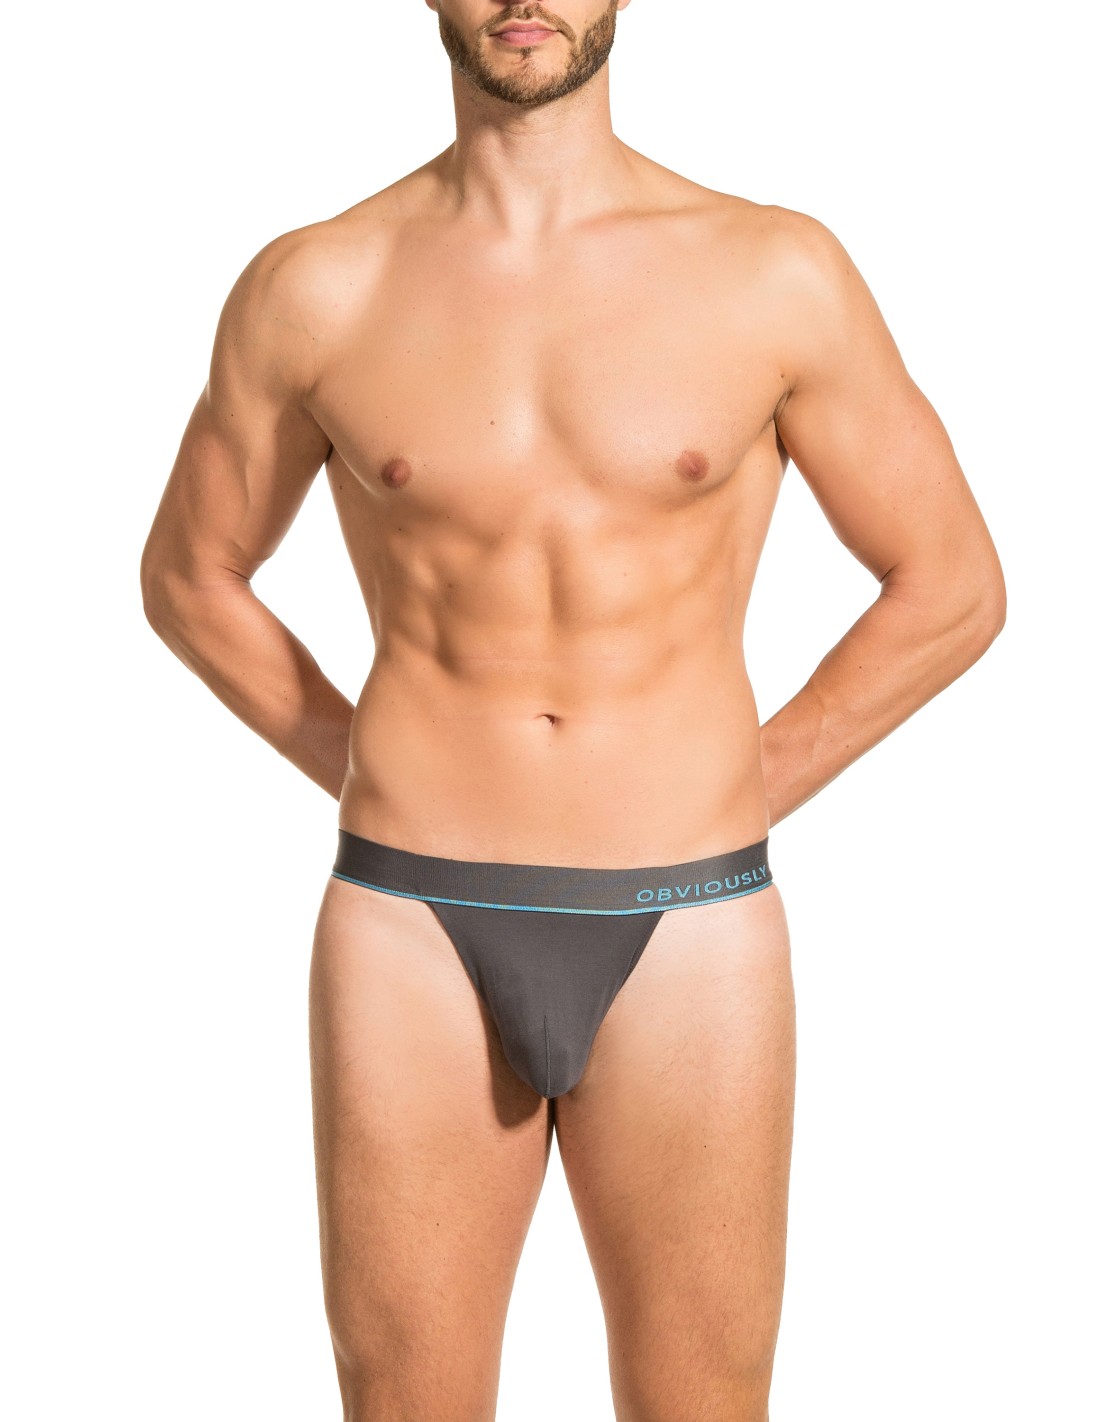 Obviously Apparel - PrimeMan Thong - Ice